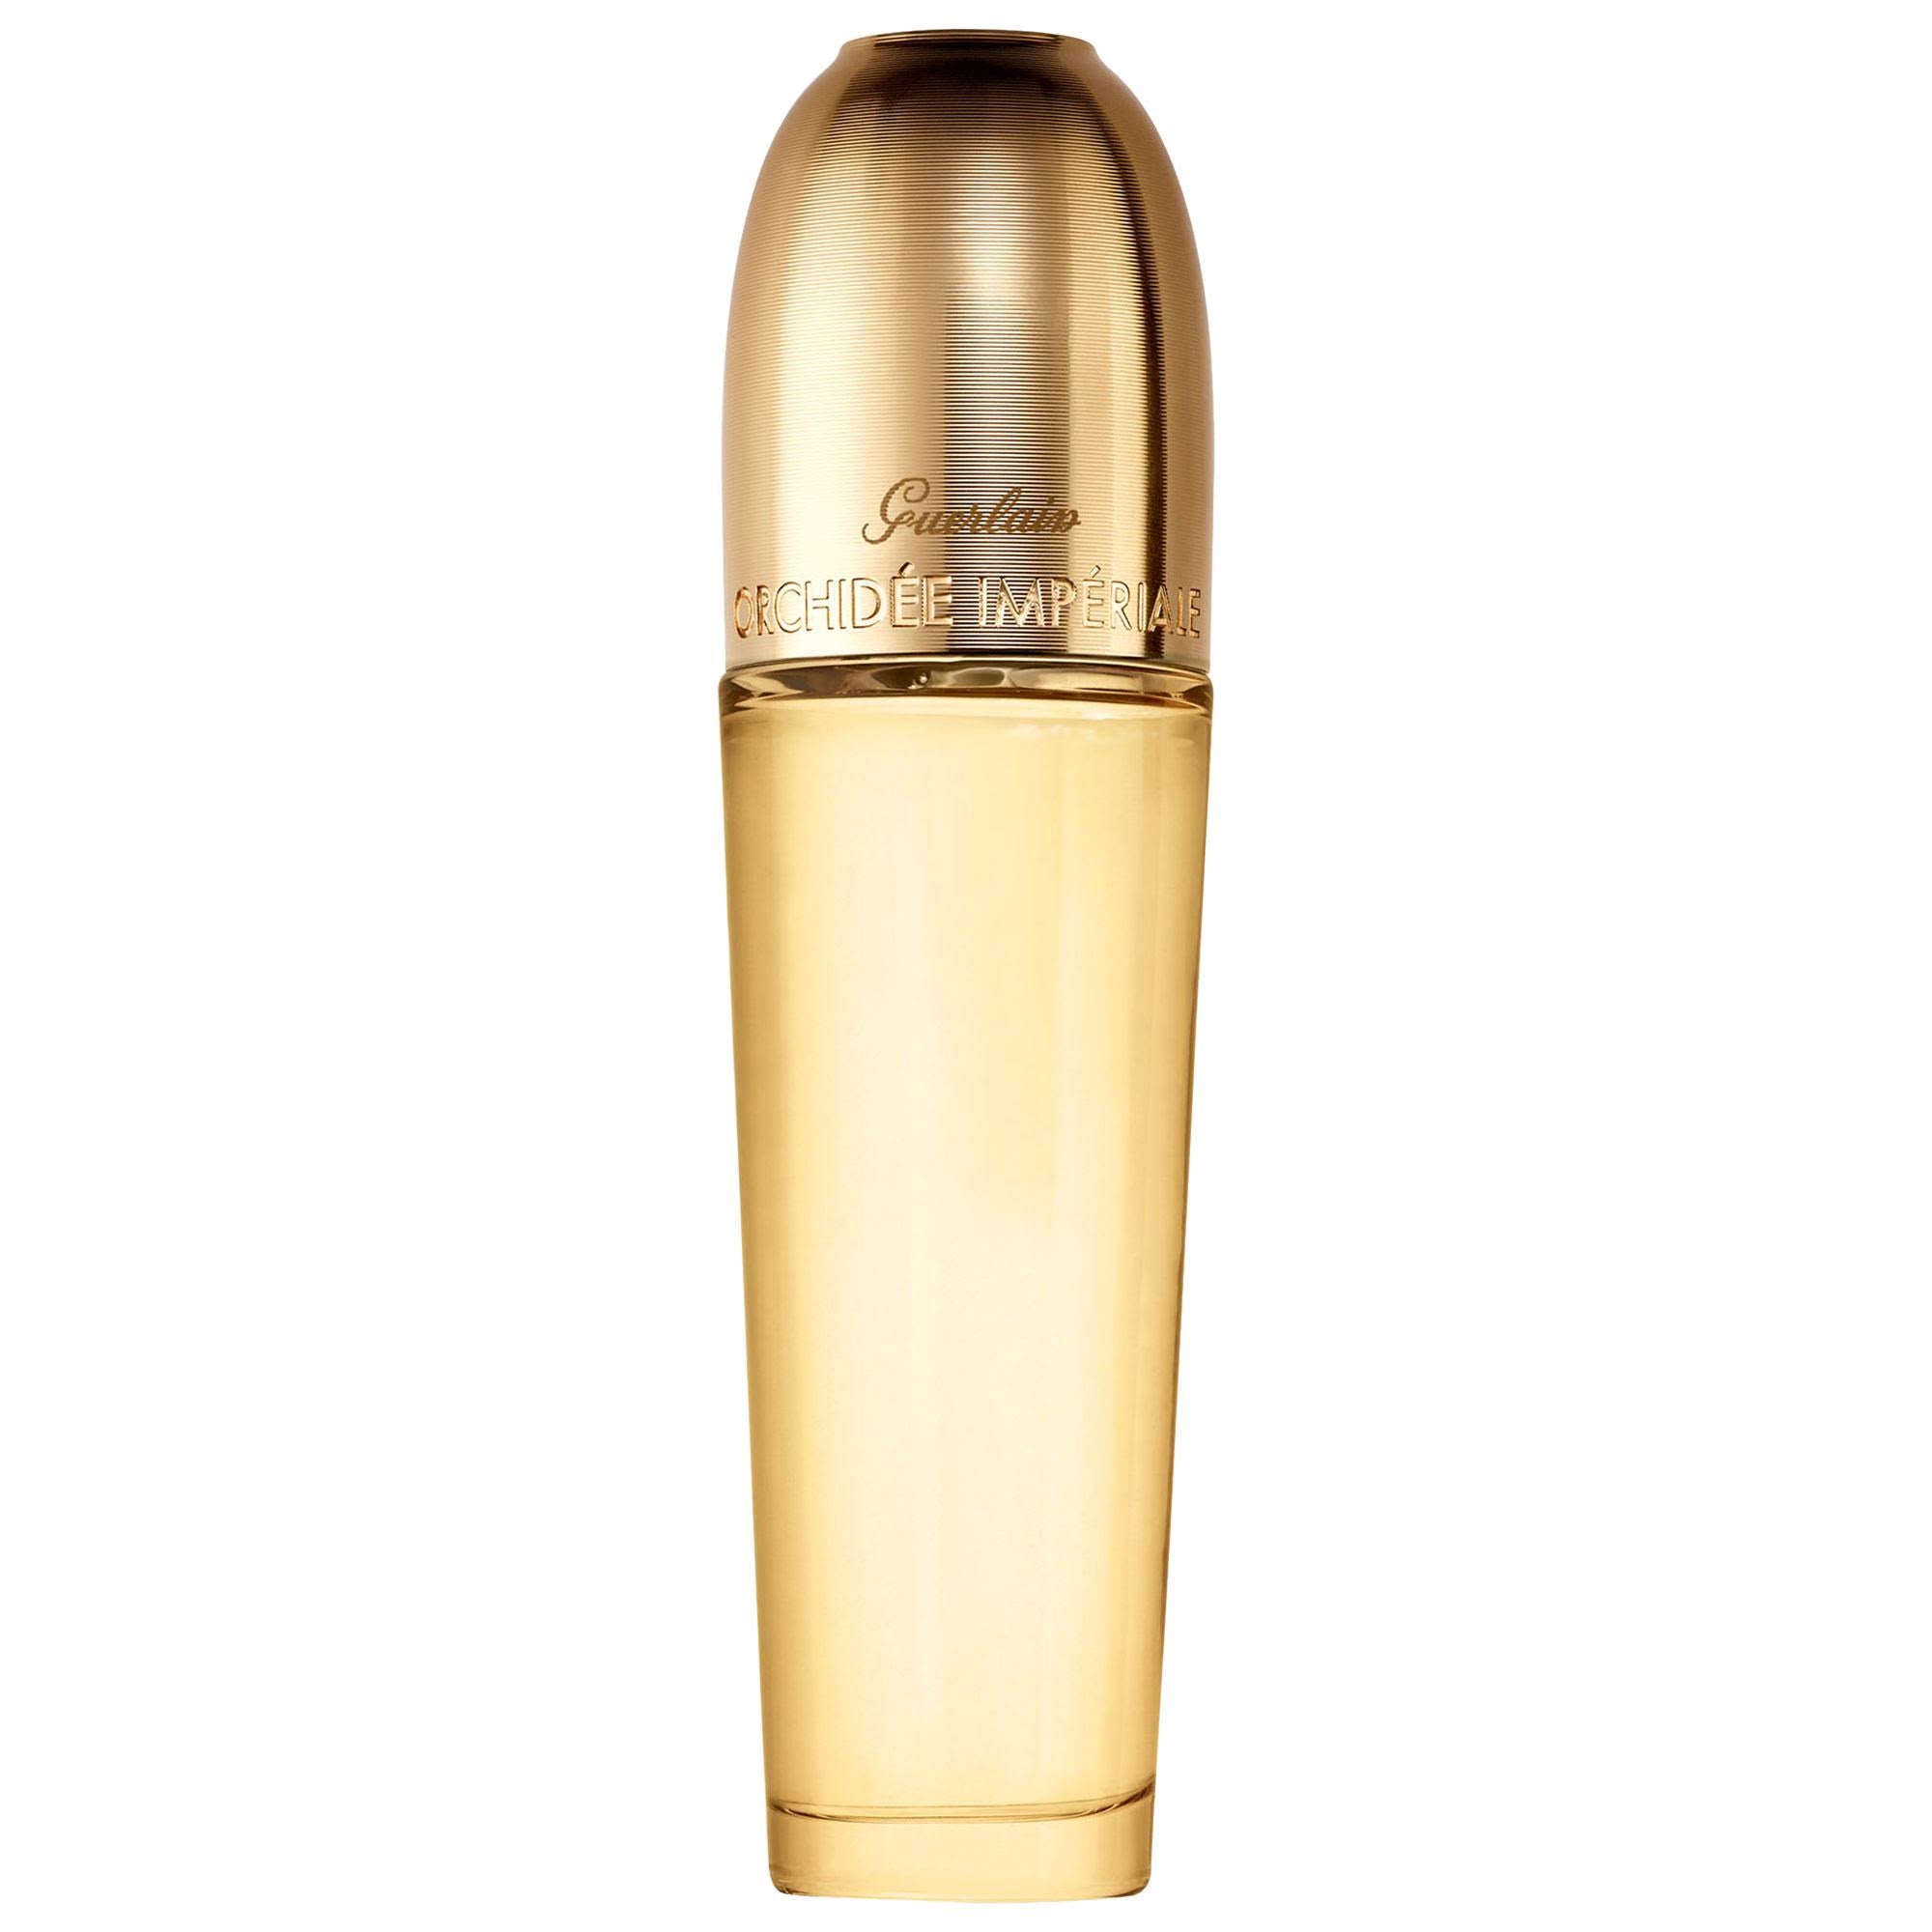 Guerlain Orchidee Imperiale The Imperial Oil (30ml)